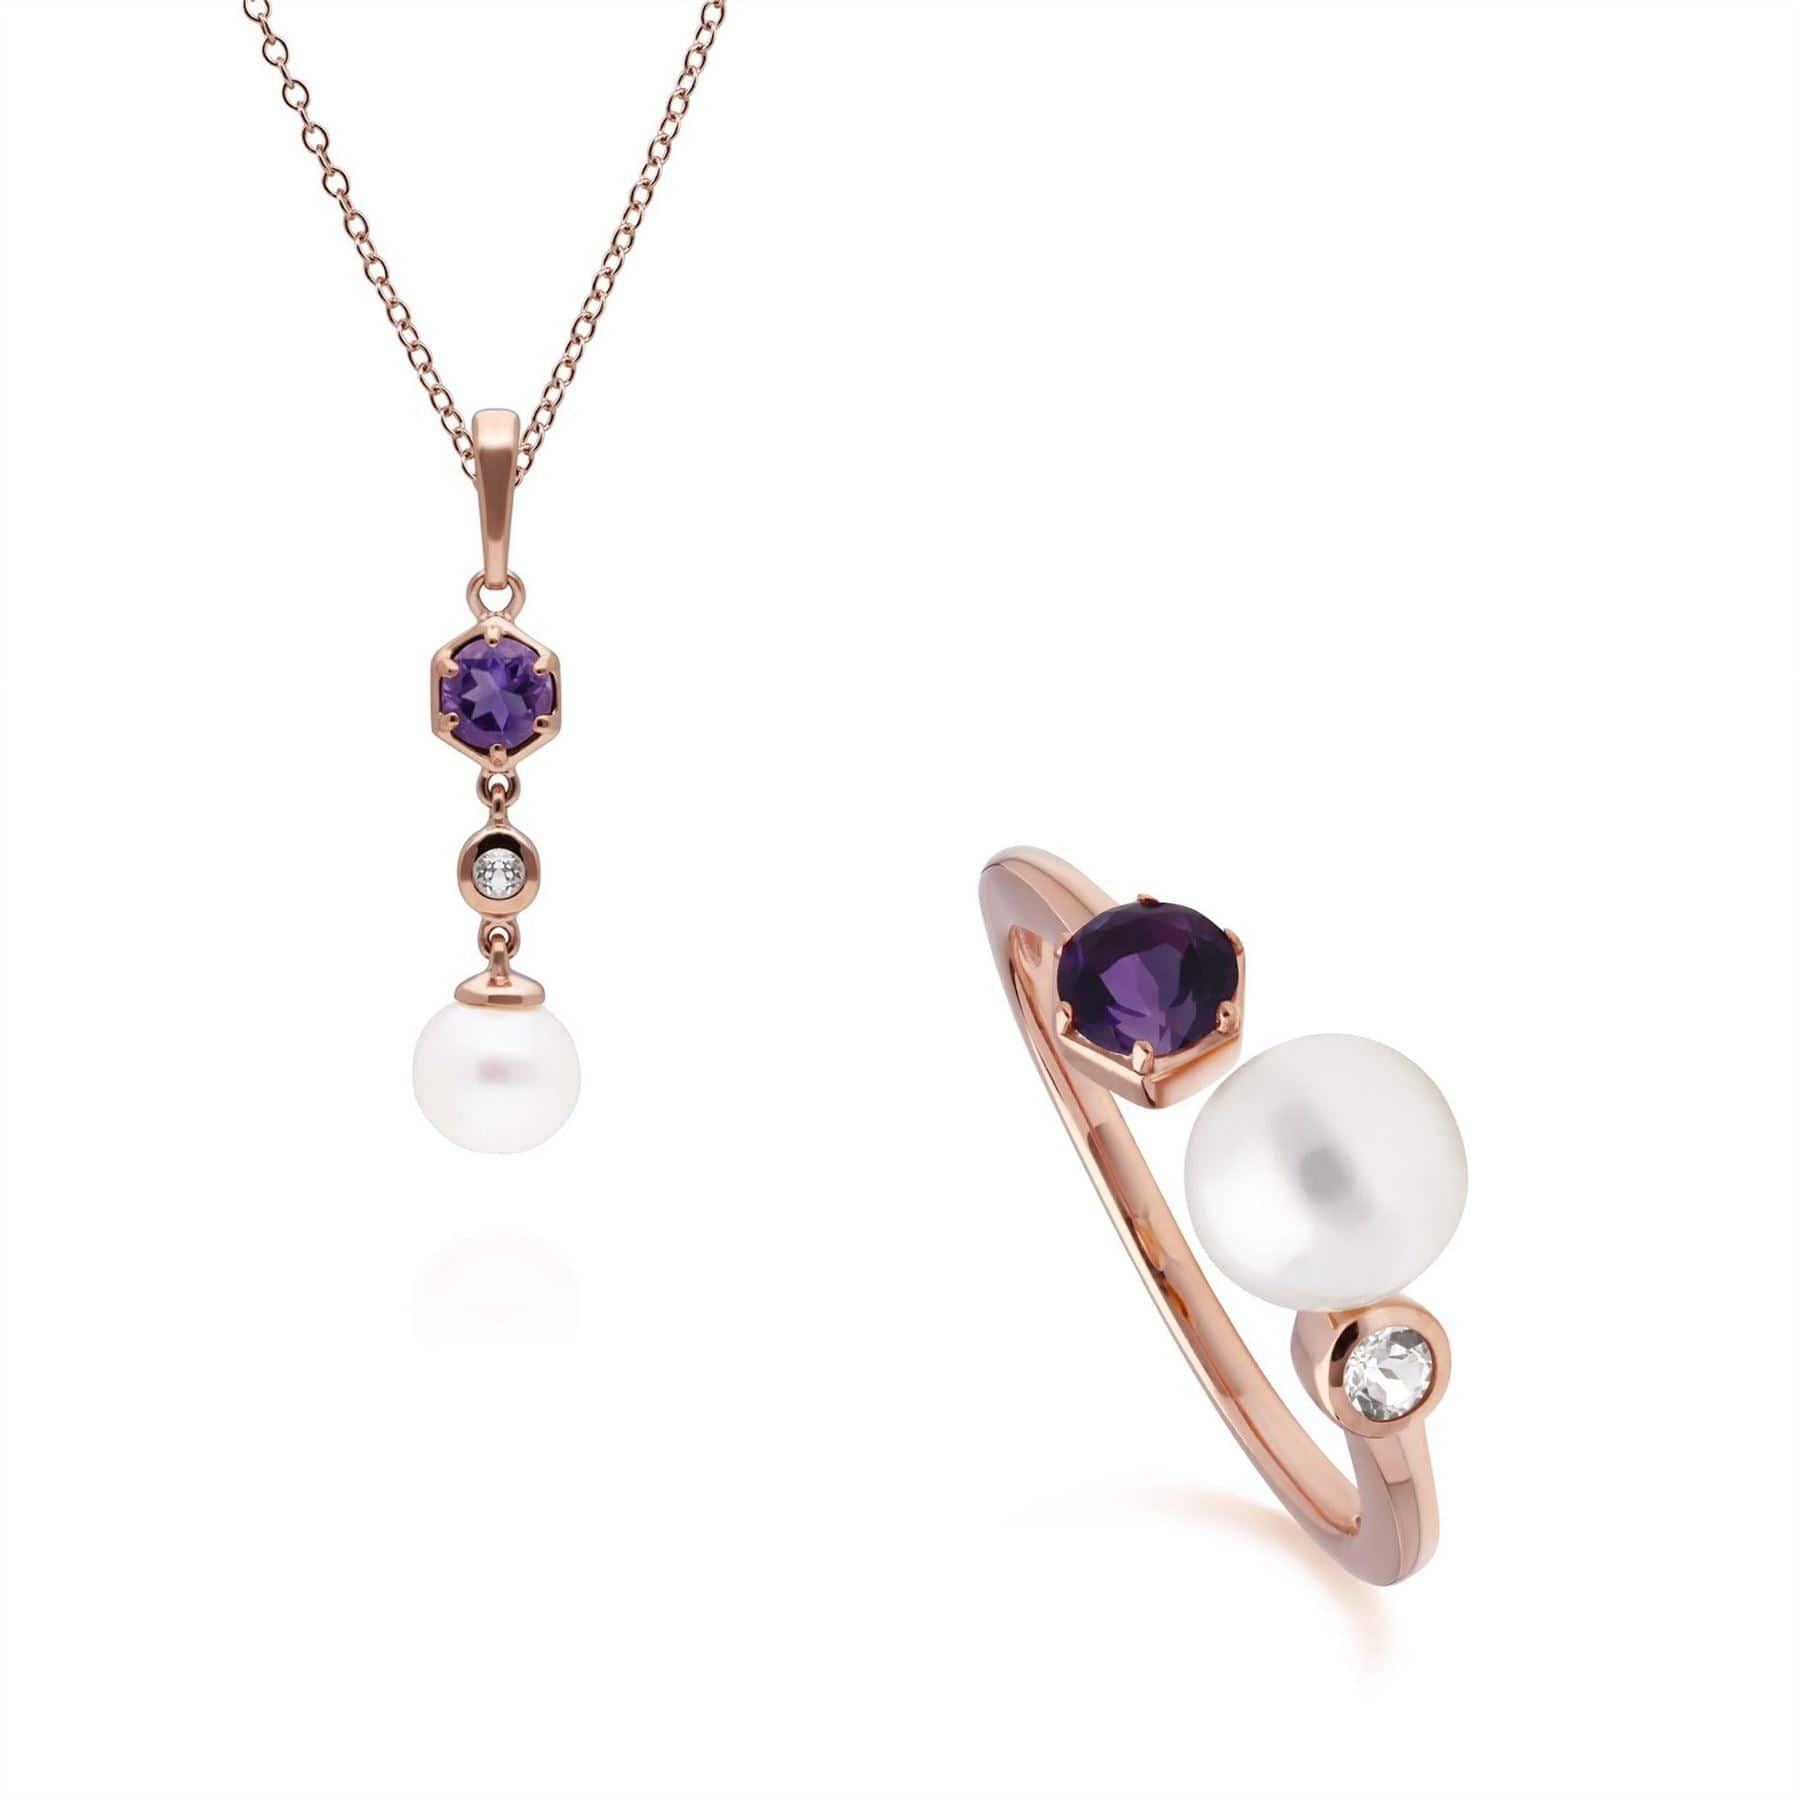 Image of Modern Pearl, Amethyst & Topaz Pendant & Ring Set in Rose Gold Plated Silver